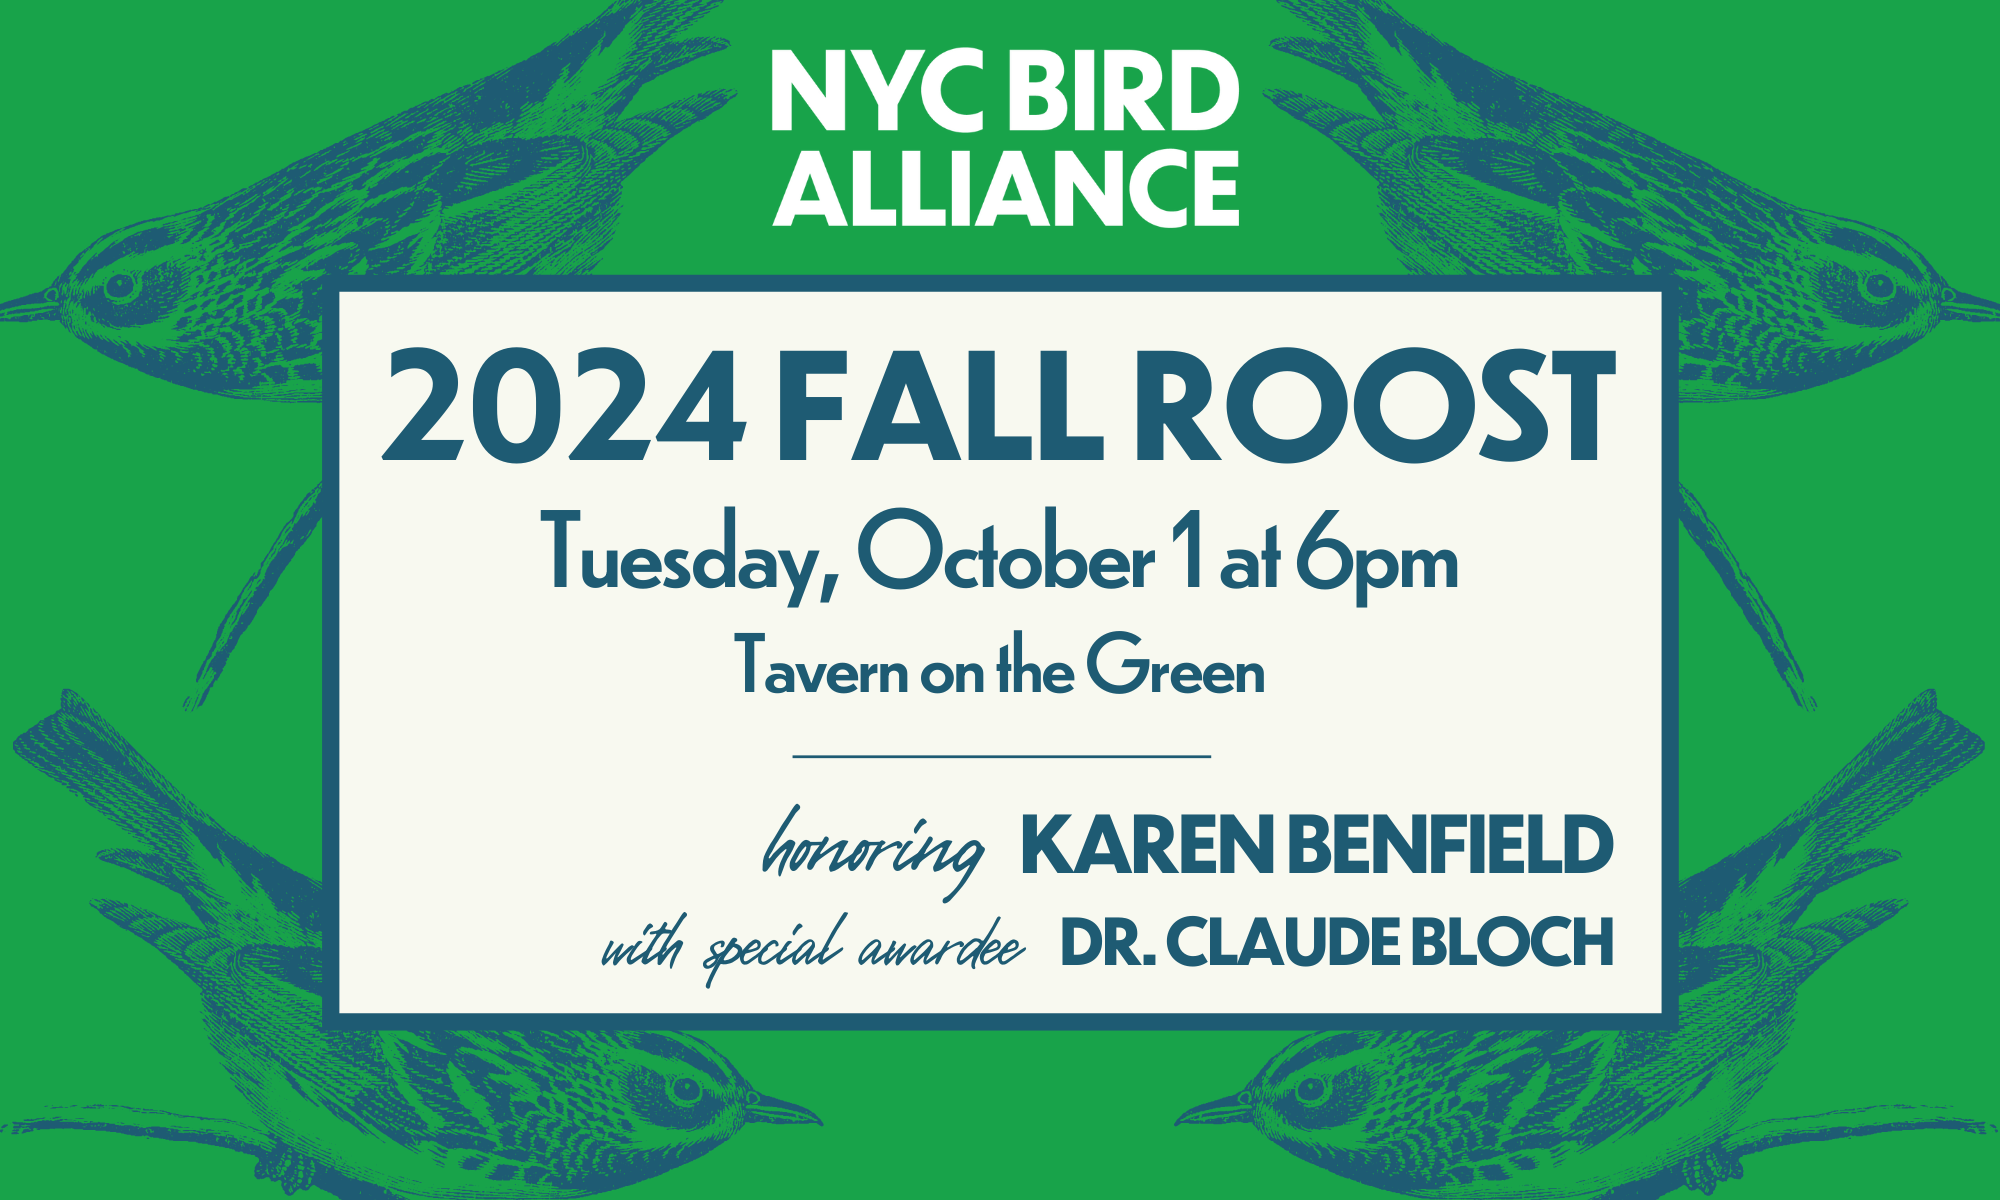 2024 Fall Roost, Tuesday, October 1 at 6pm, Tavern on the Green; honoring Karen Benfield with special awardee Claude Bloch